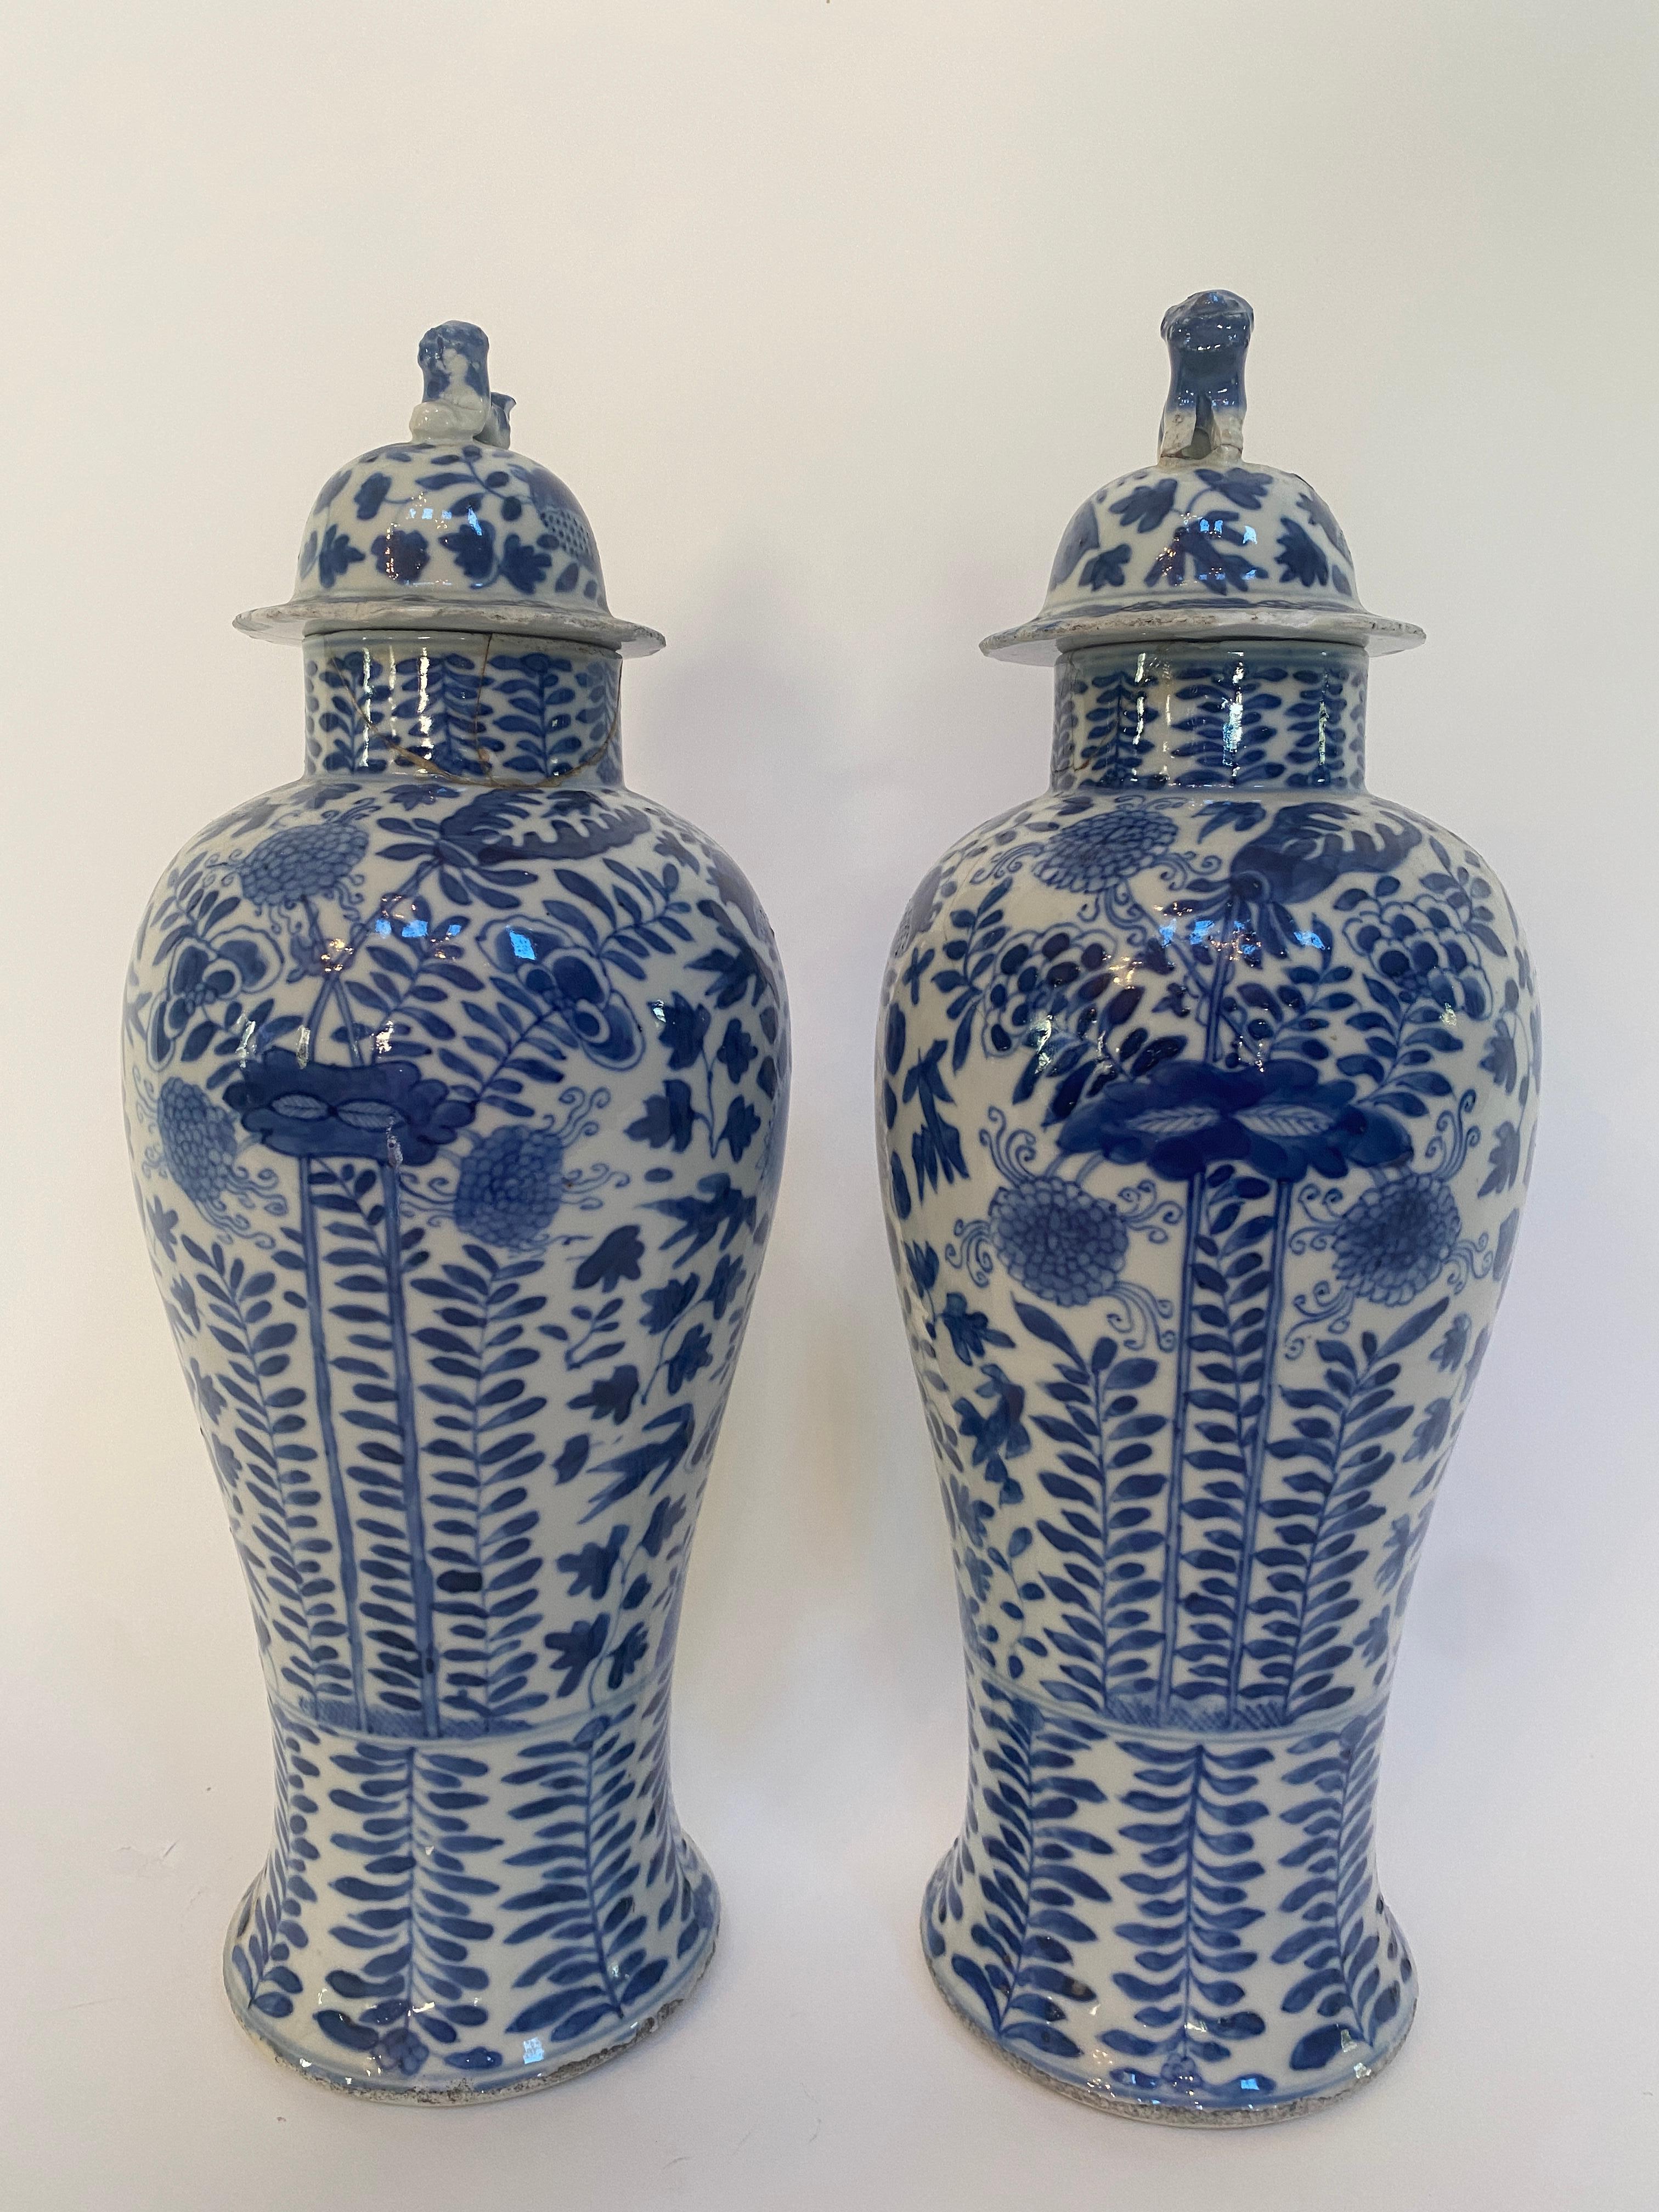 Qing 18th Century Antique Pair of Chinese Blue and White Porcelain Jars and Covers For Sale